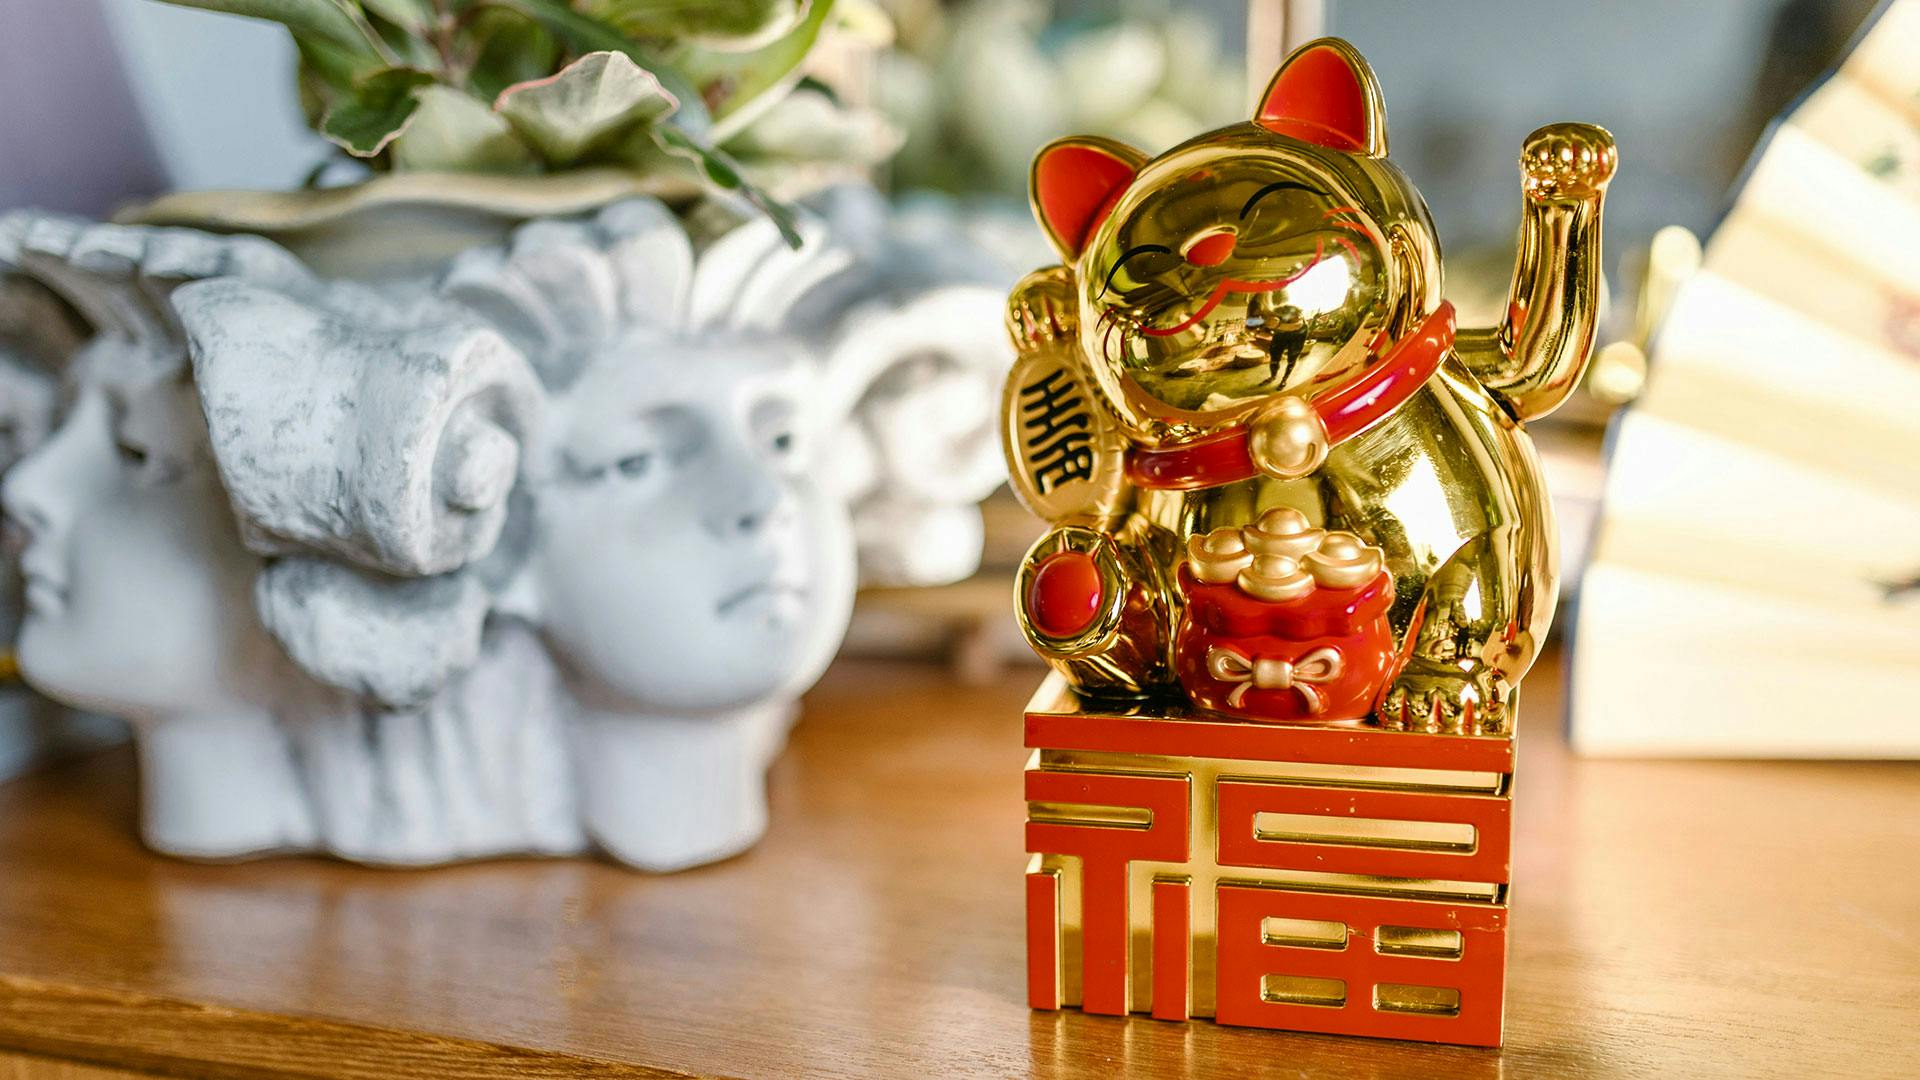 A lucky cat figurine on a shelf with some other tchotchkes like statuettes and hand fans